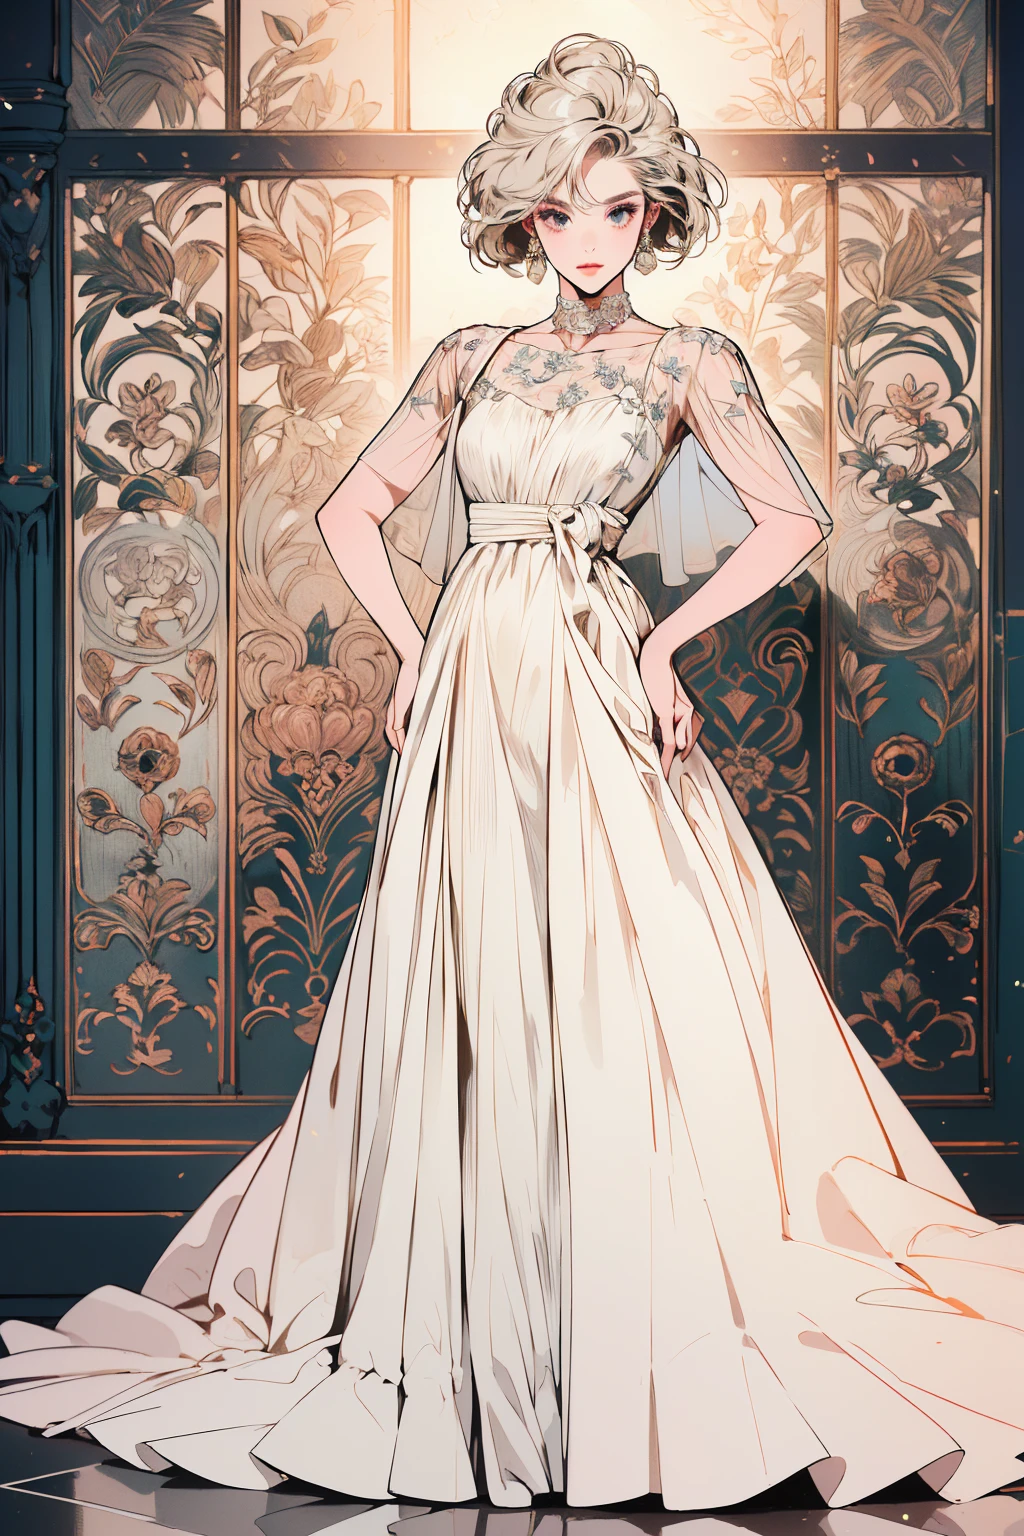 Models, professional: 1.6, (Best Quality, 4k, 8k, High resolution, Masterpiece: 1.2), ultra detailed, realist, modern style, Moda elegant, full body shot: 1.5, plano general: 1.5, elegant, ((modeling clothes, beautiful white lace long dress:1.7)), accessories, elegant pose as a model, modern and beautiful hair, by the chestnut, showy, bold background, Studio lighting, dynamic and elegant pose .